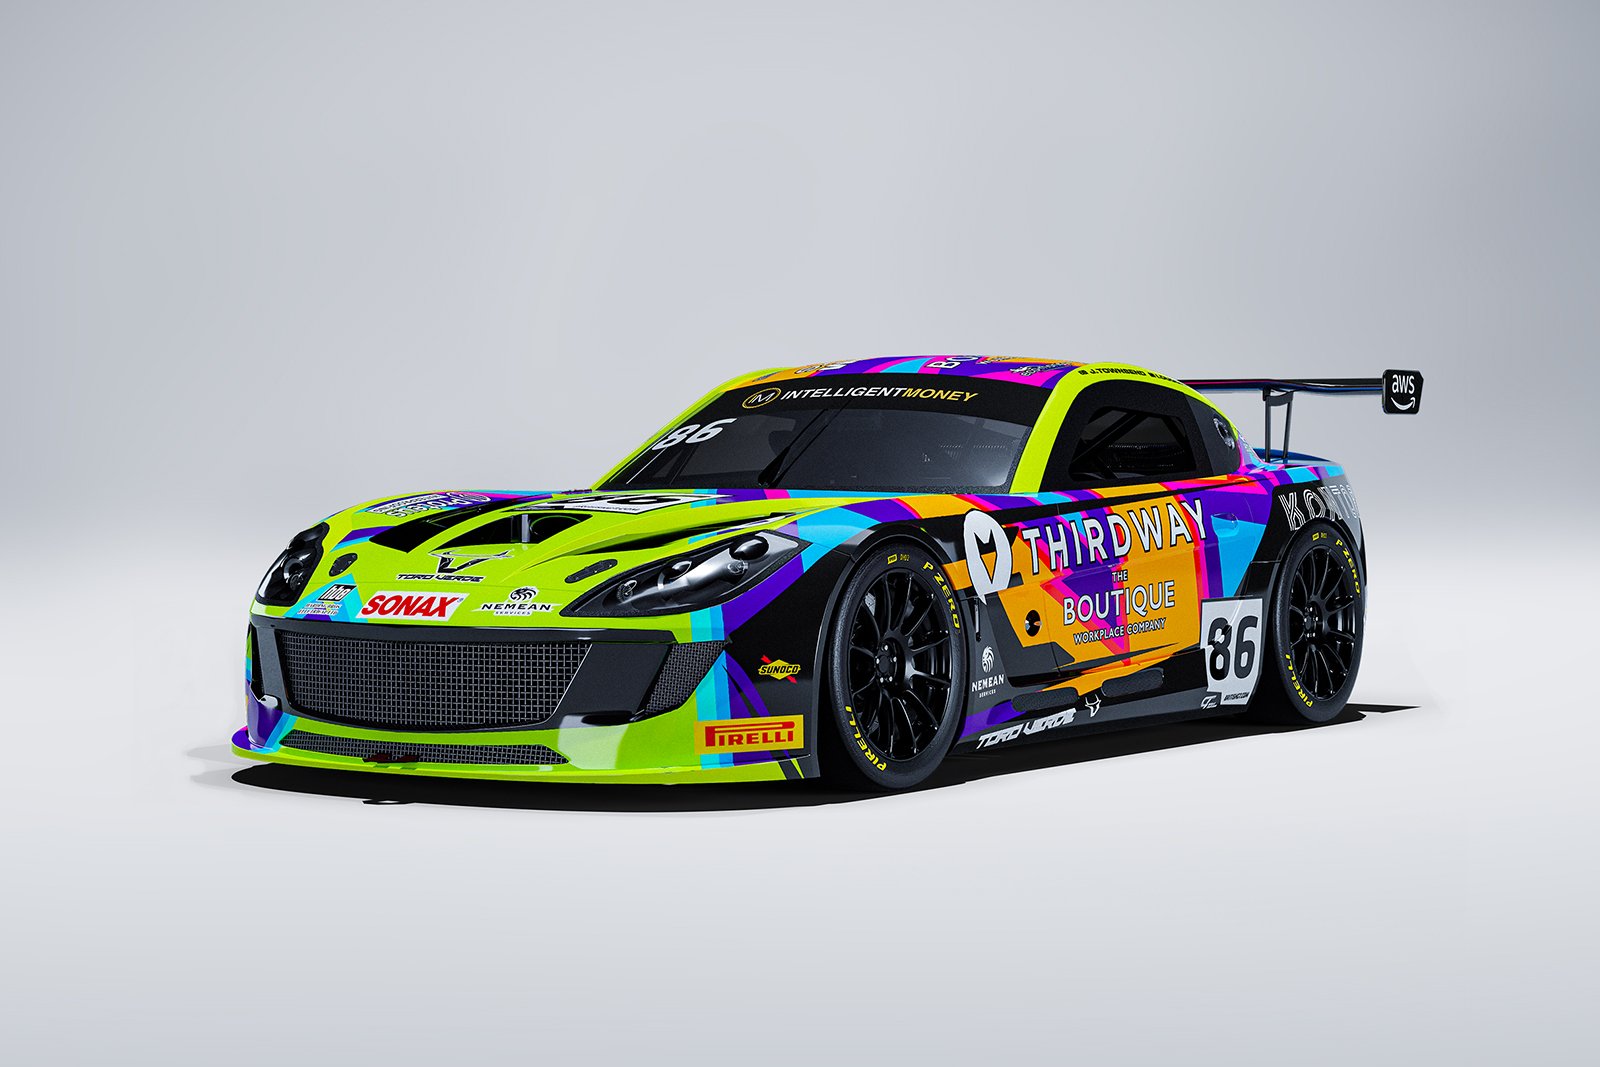 Toro Verde have announced a GT4 campaign with a Ginetta G56.